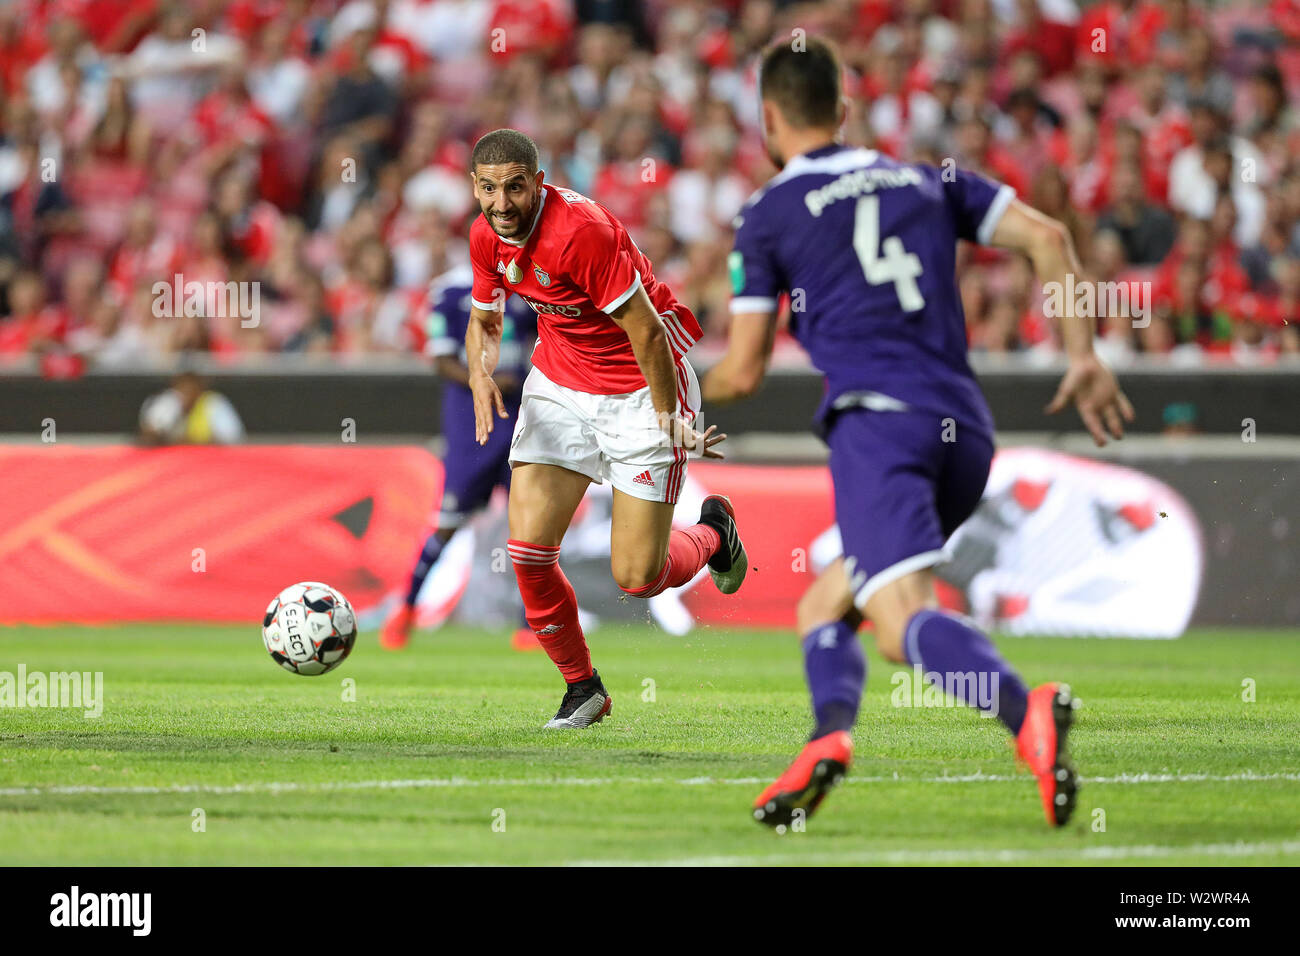 Lisbon, Portugal. 10th July, 2019. Adel Taarabt of SL Benfica in action during the Pre-Season football match 2019/2020 between SL Benfica vs Royal Sporting Club Anderlecht. (Final score: SL Benfica 1 - 2 Royal Sporting Club Anderlecht) Credit: SOPA Images Limited/Alamy Live News Stock Photo